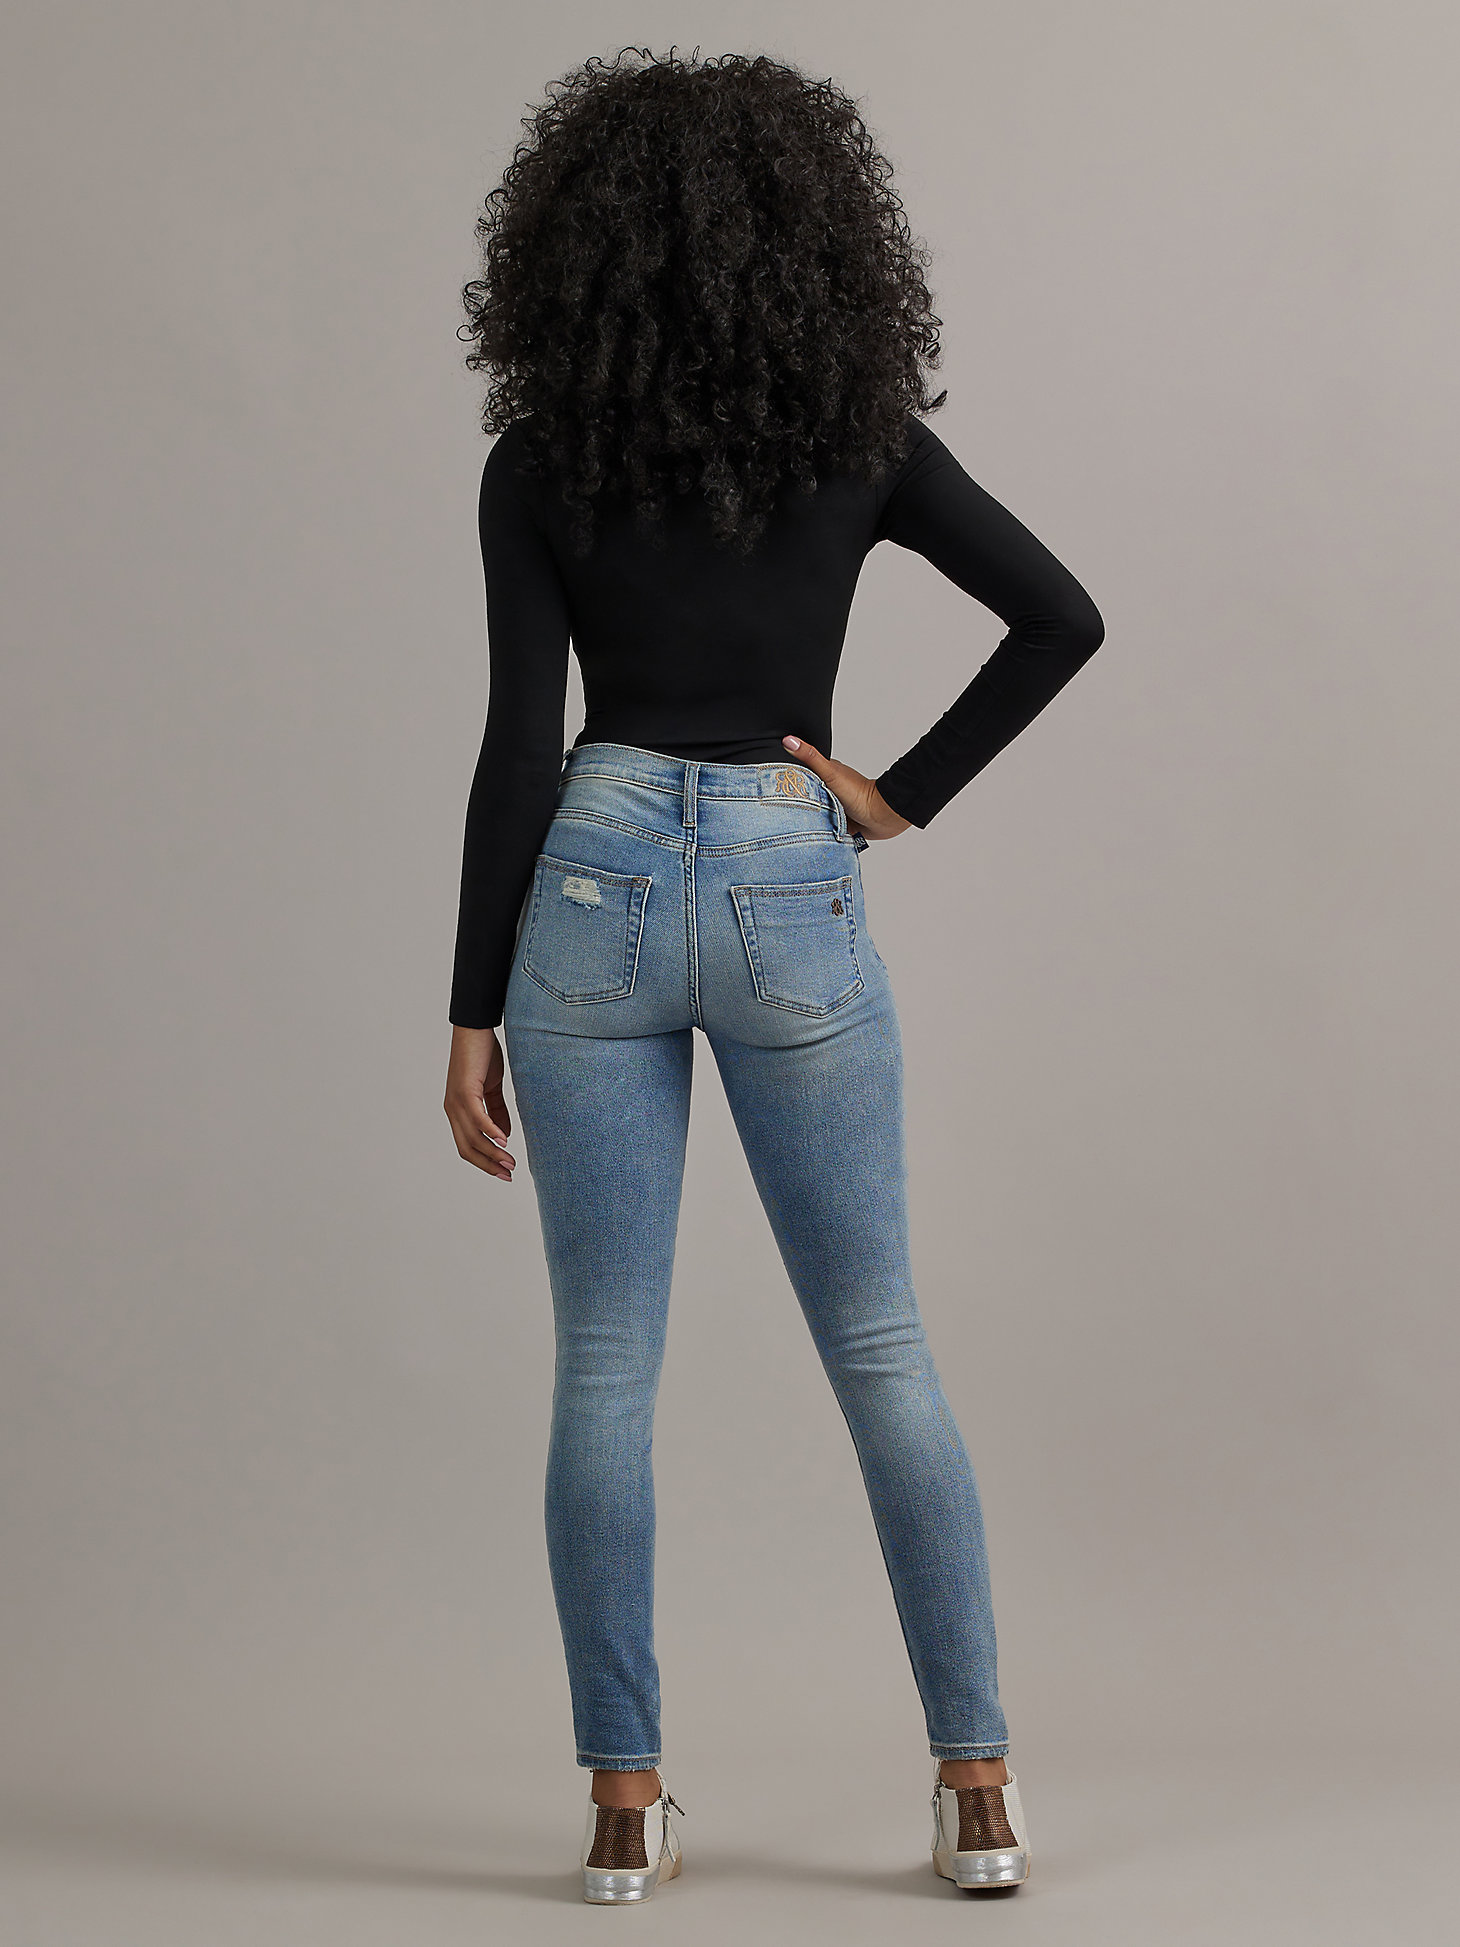 Women's High Roller High Rise Skinny Jean in Off Limits alternative view 1